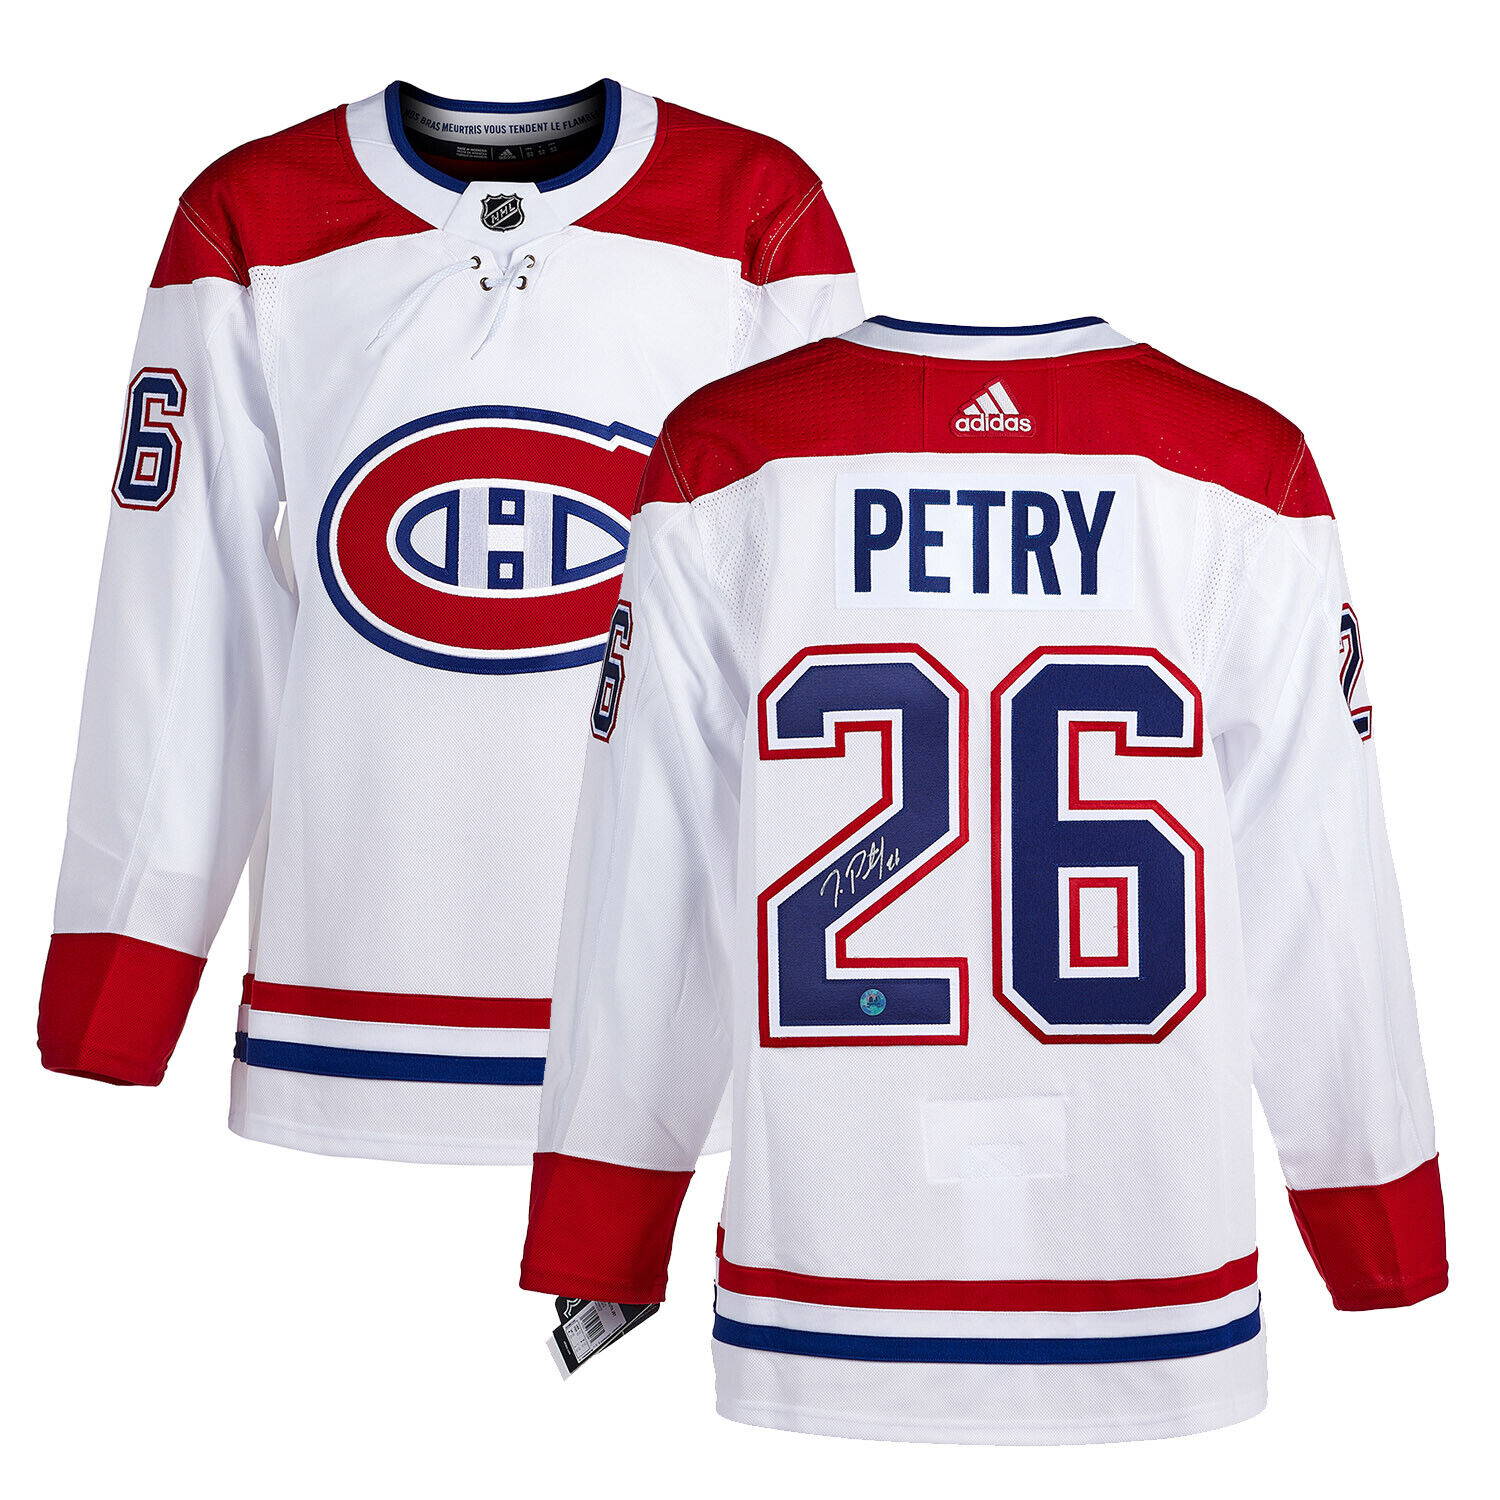 Jeff Petry Montreal Hockey Signed White ADS Jersey